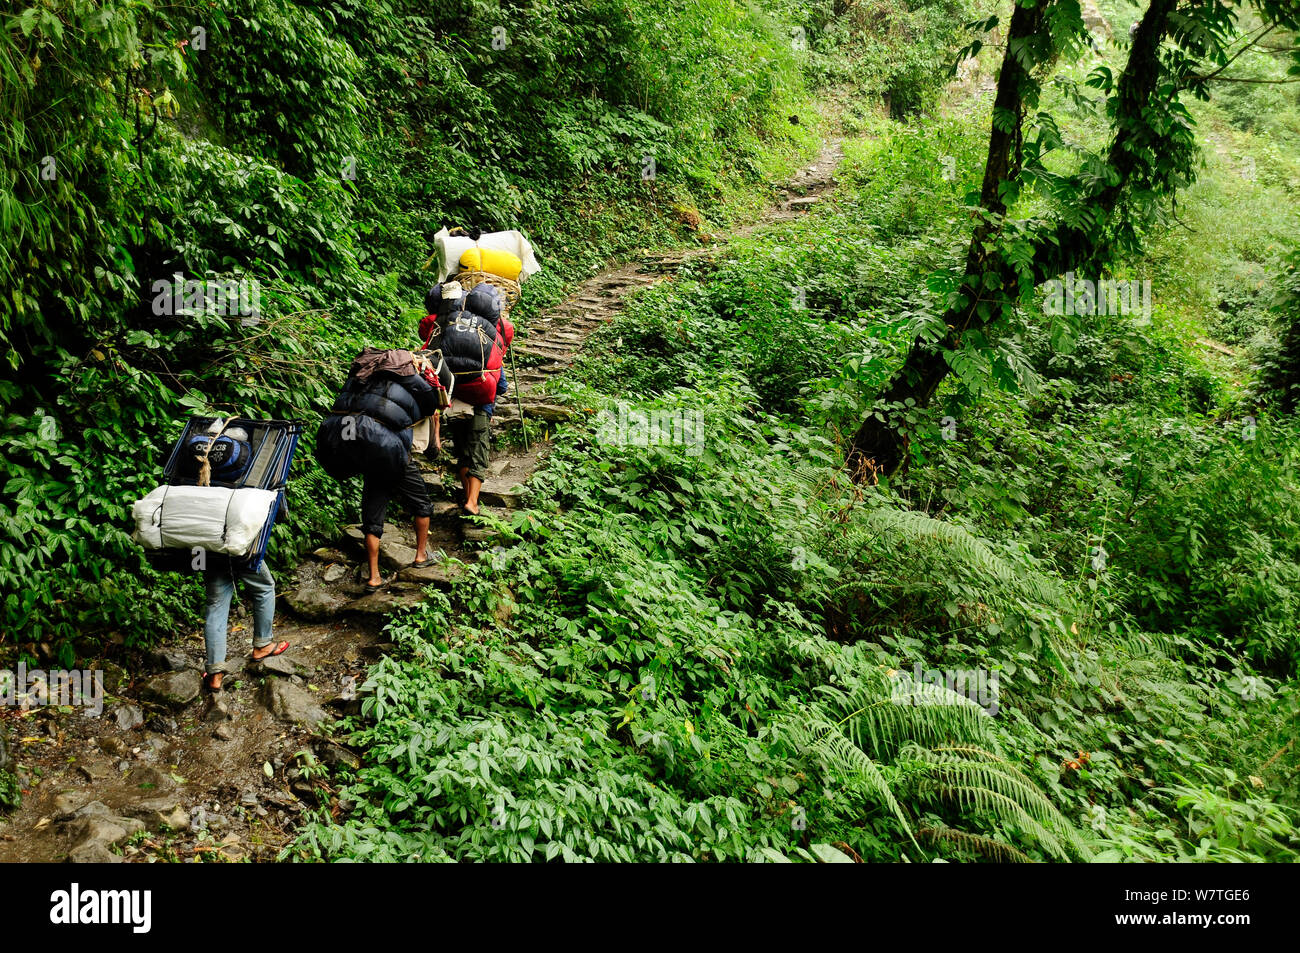 Porters carrying baggage in the Modi Khola river valley. Annapurna Sanctuary, central Nepal, November 2011. Stock Photo